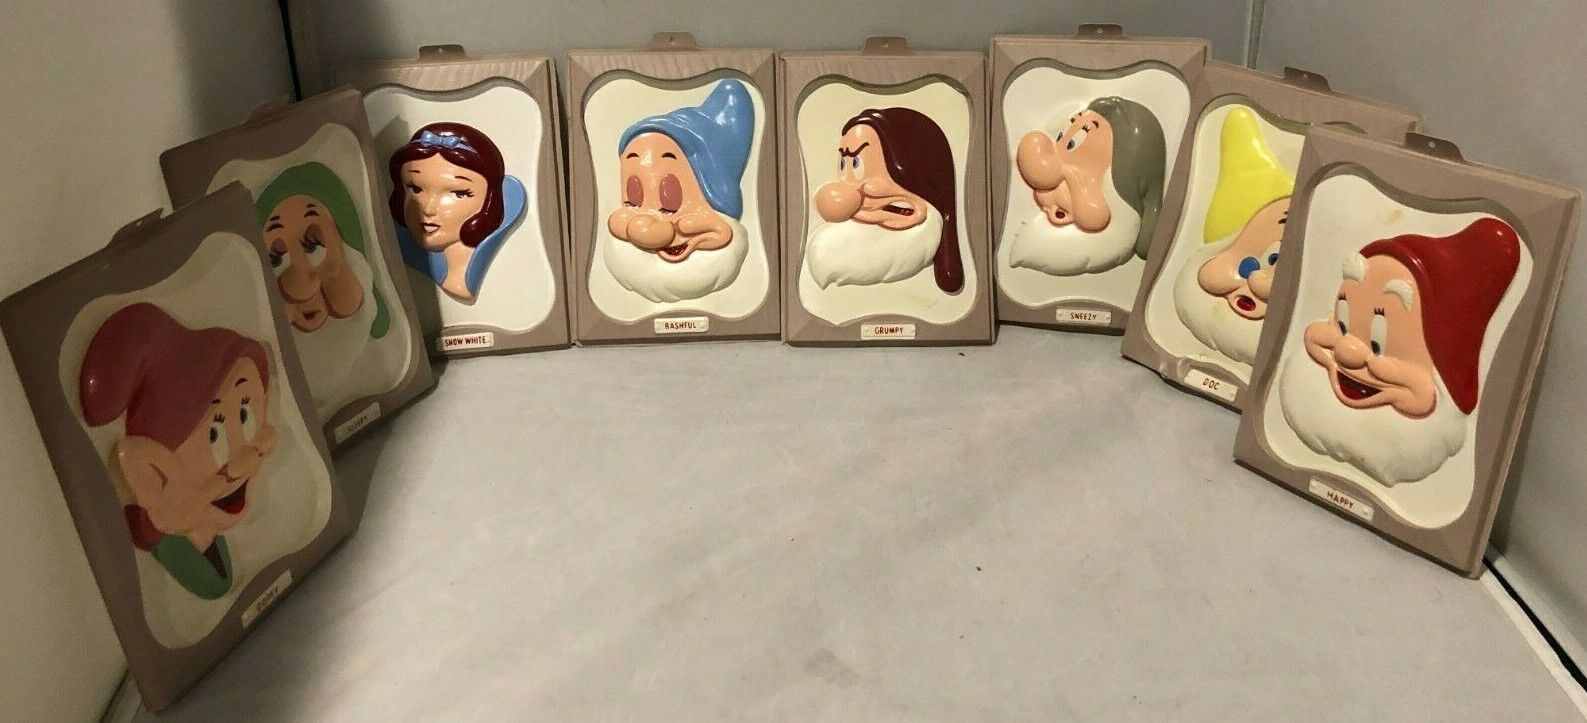 RARE 1958 Snow White & the 7 Dwarfs Wall Hanging Set 5x7 Plastic Molded Plaques